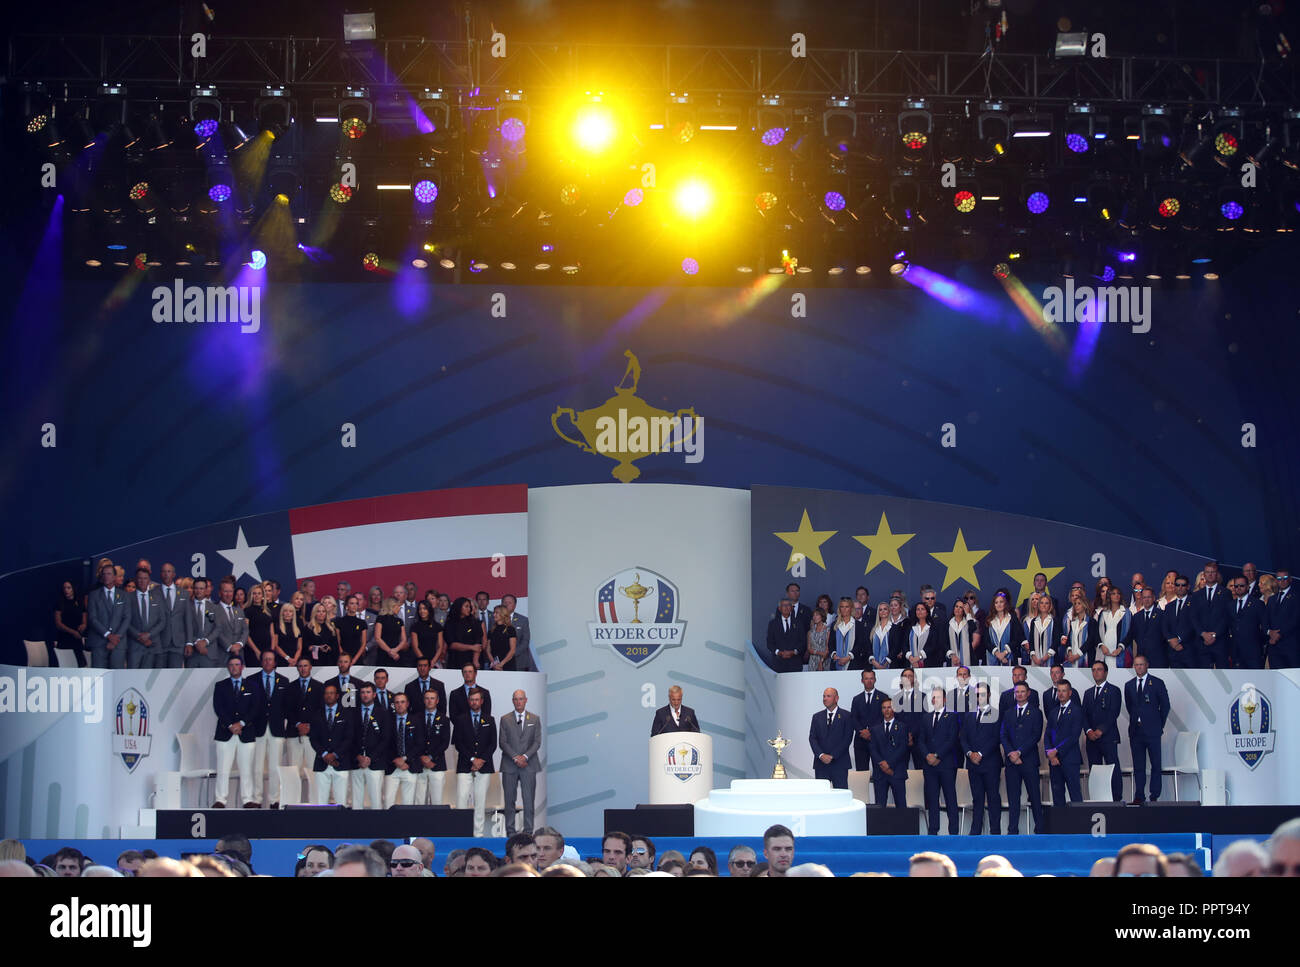 Team USA and Team Europe during the Ryder Cup Opening Ceremony at Le Golf National, Saint-Quentin-en-Yvelines, Paris. Stock Photo